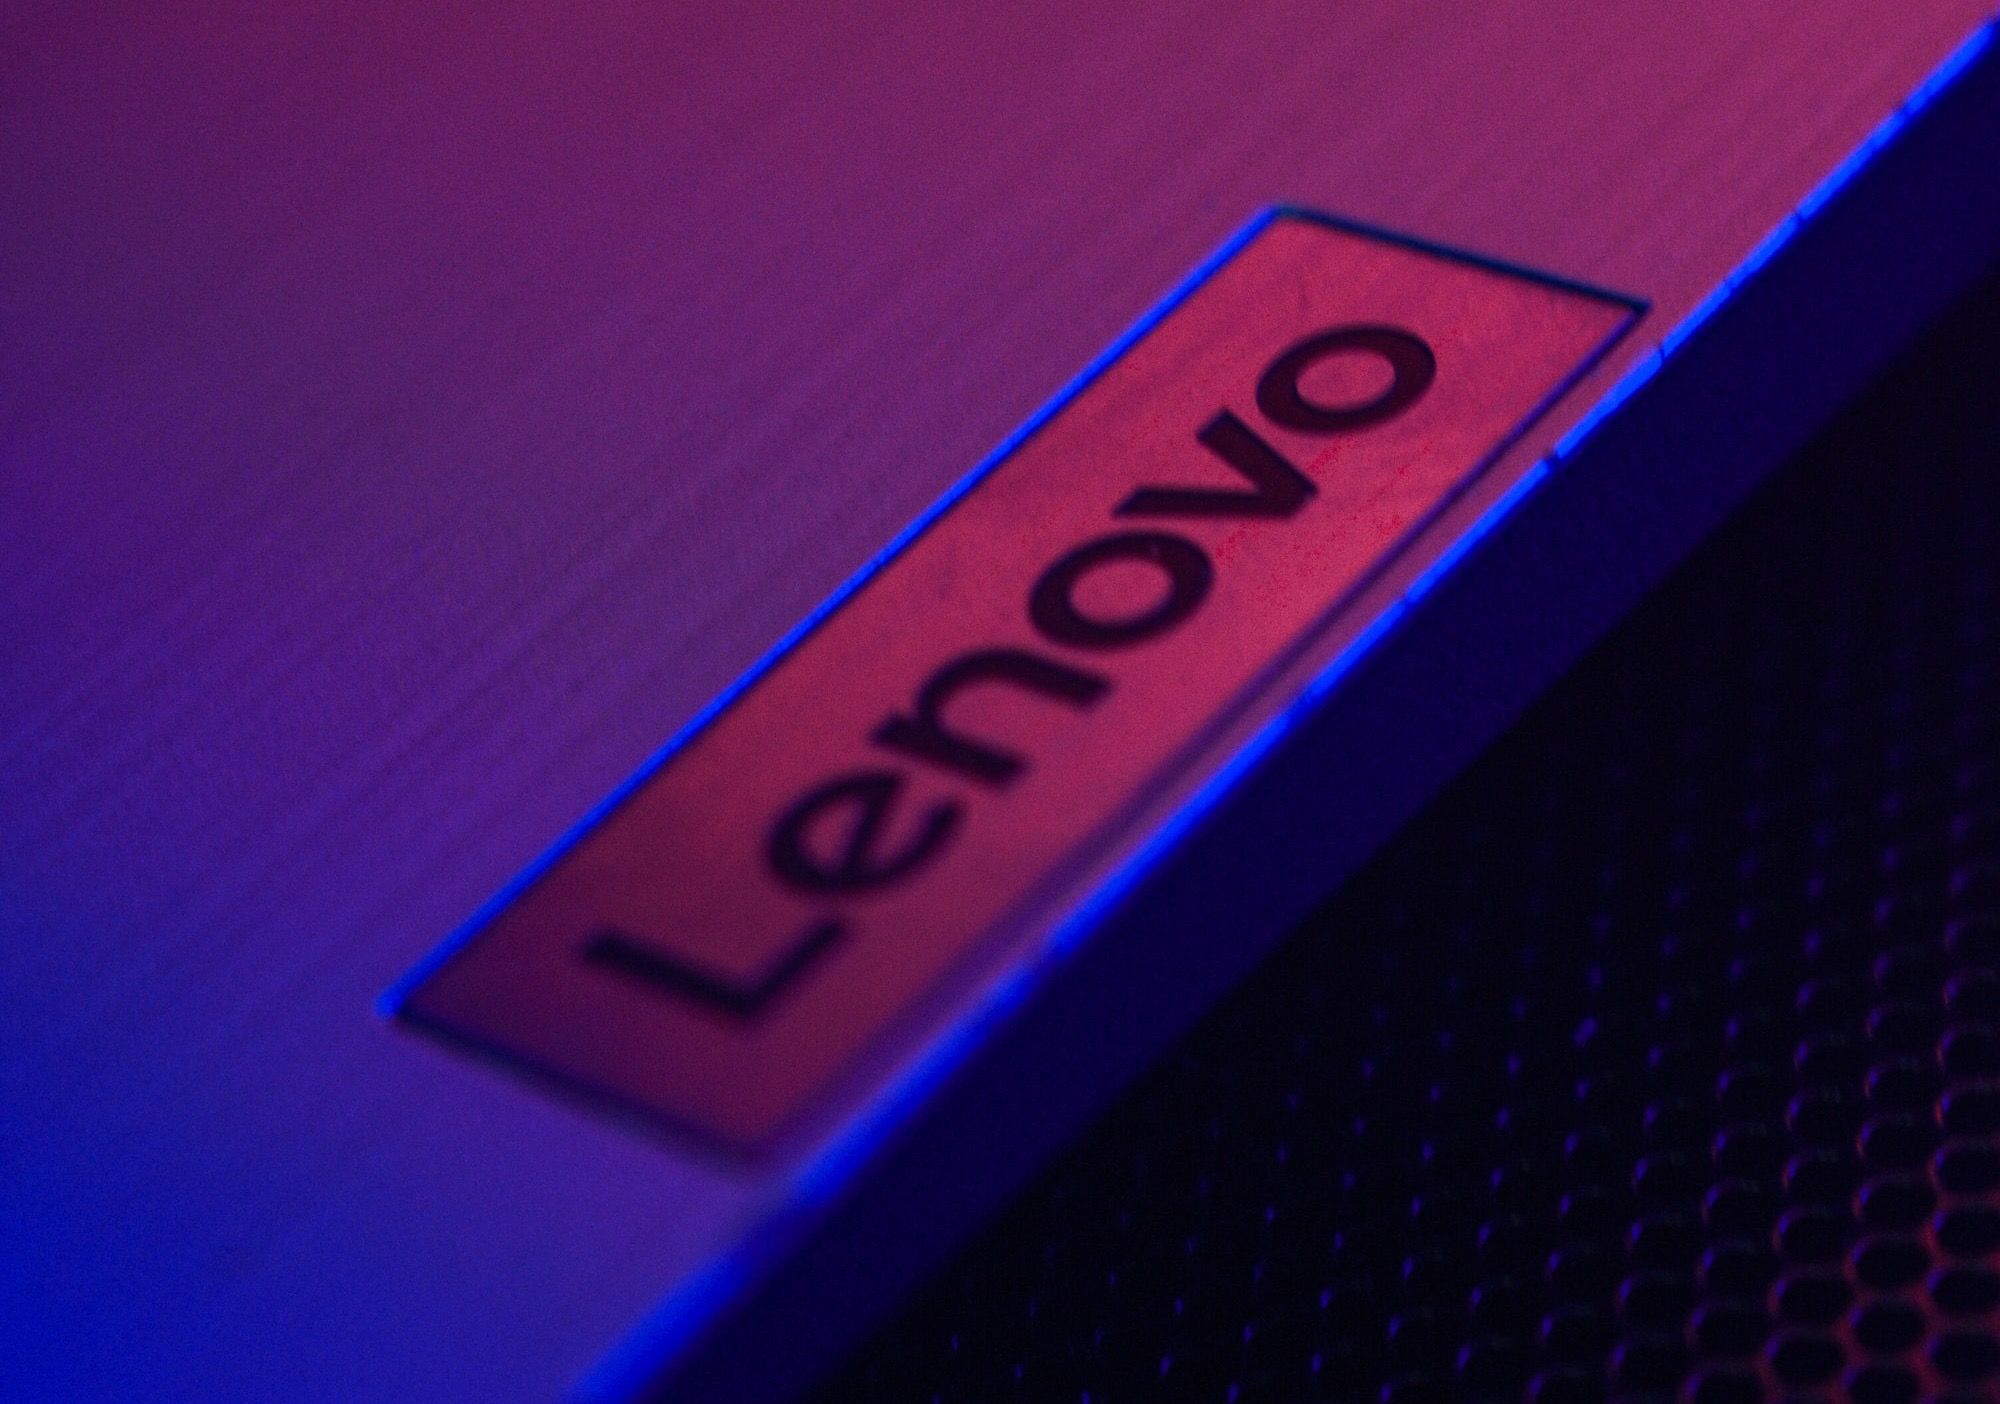 Lenovo to invest $1 billion in its AI business over the next three years